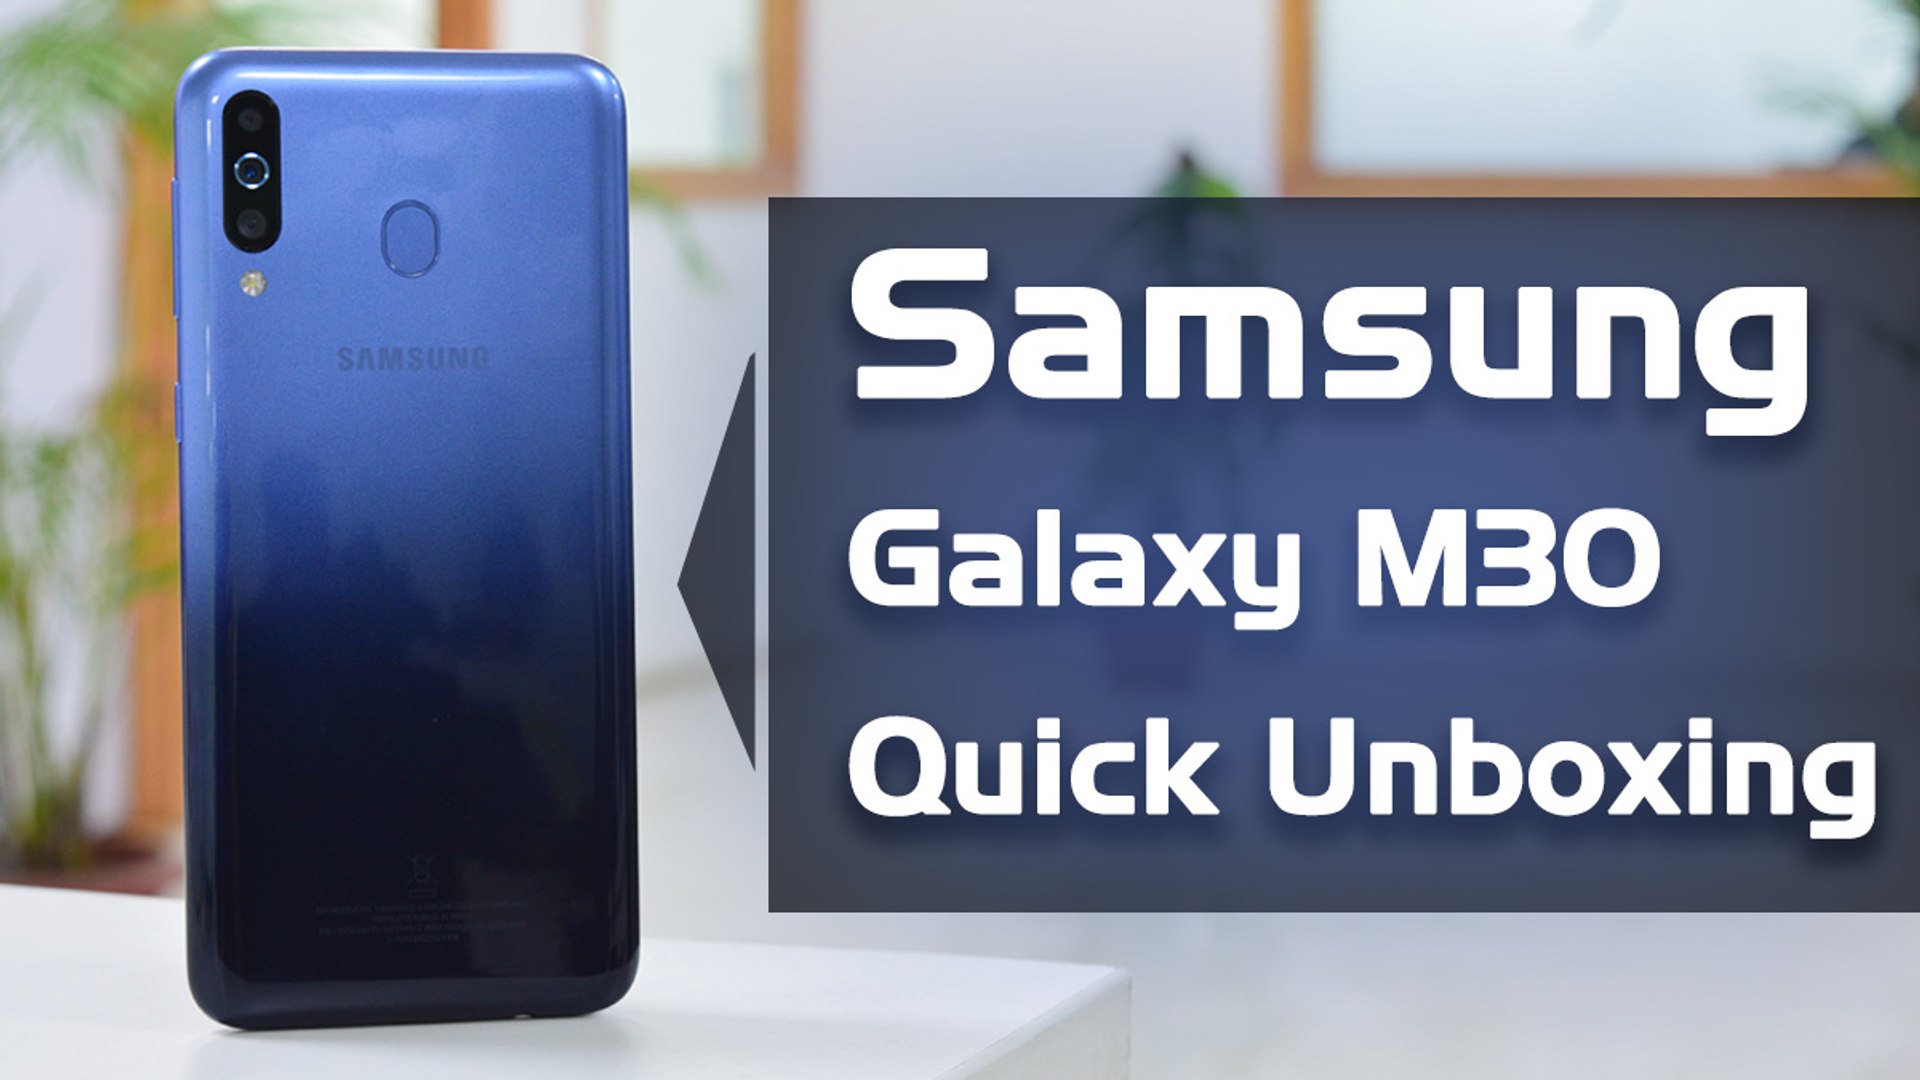 Samsung Galaxy M30 Quick Unboxing Video Dailymotion